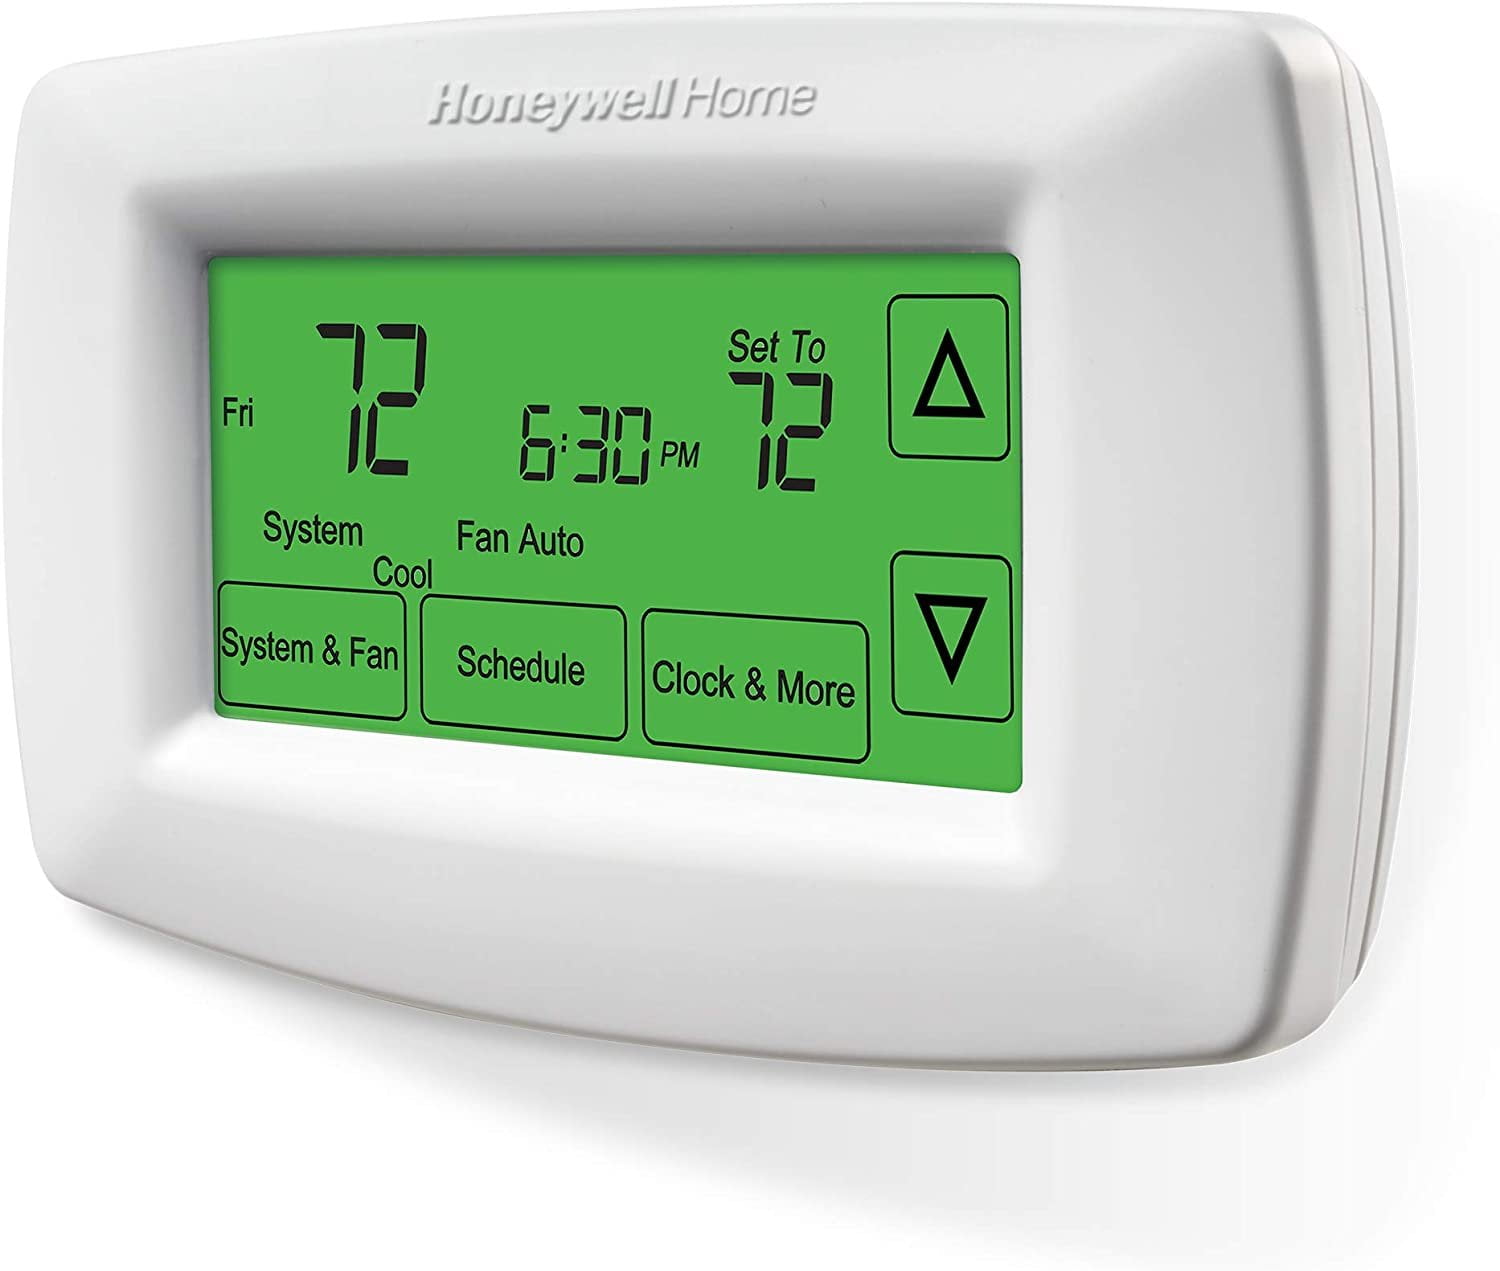 Honeywell RTH7500D Programmable Thermostat Fast Free Shipping! 